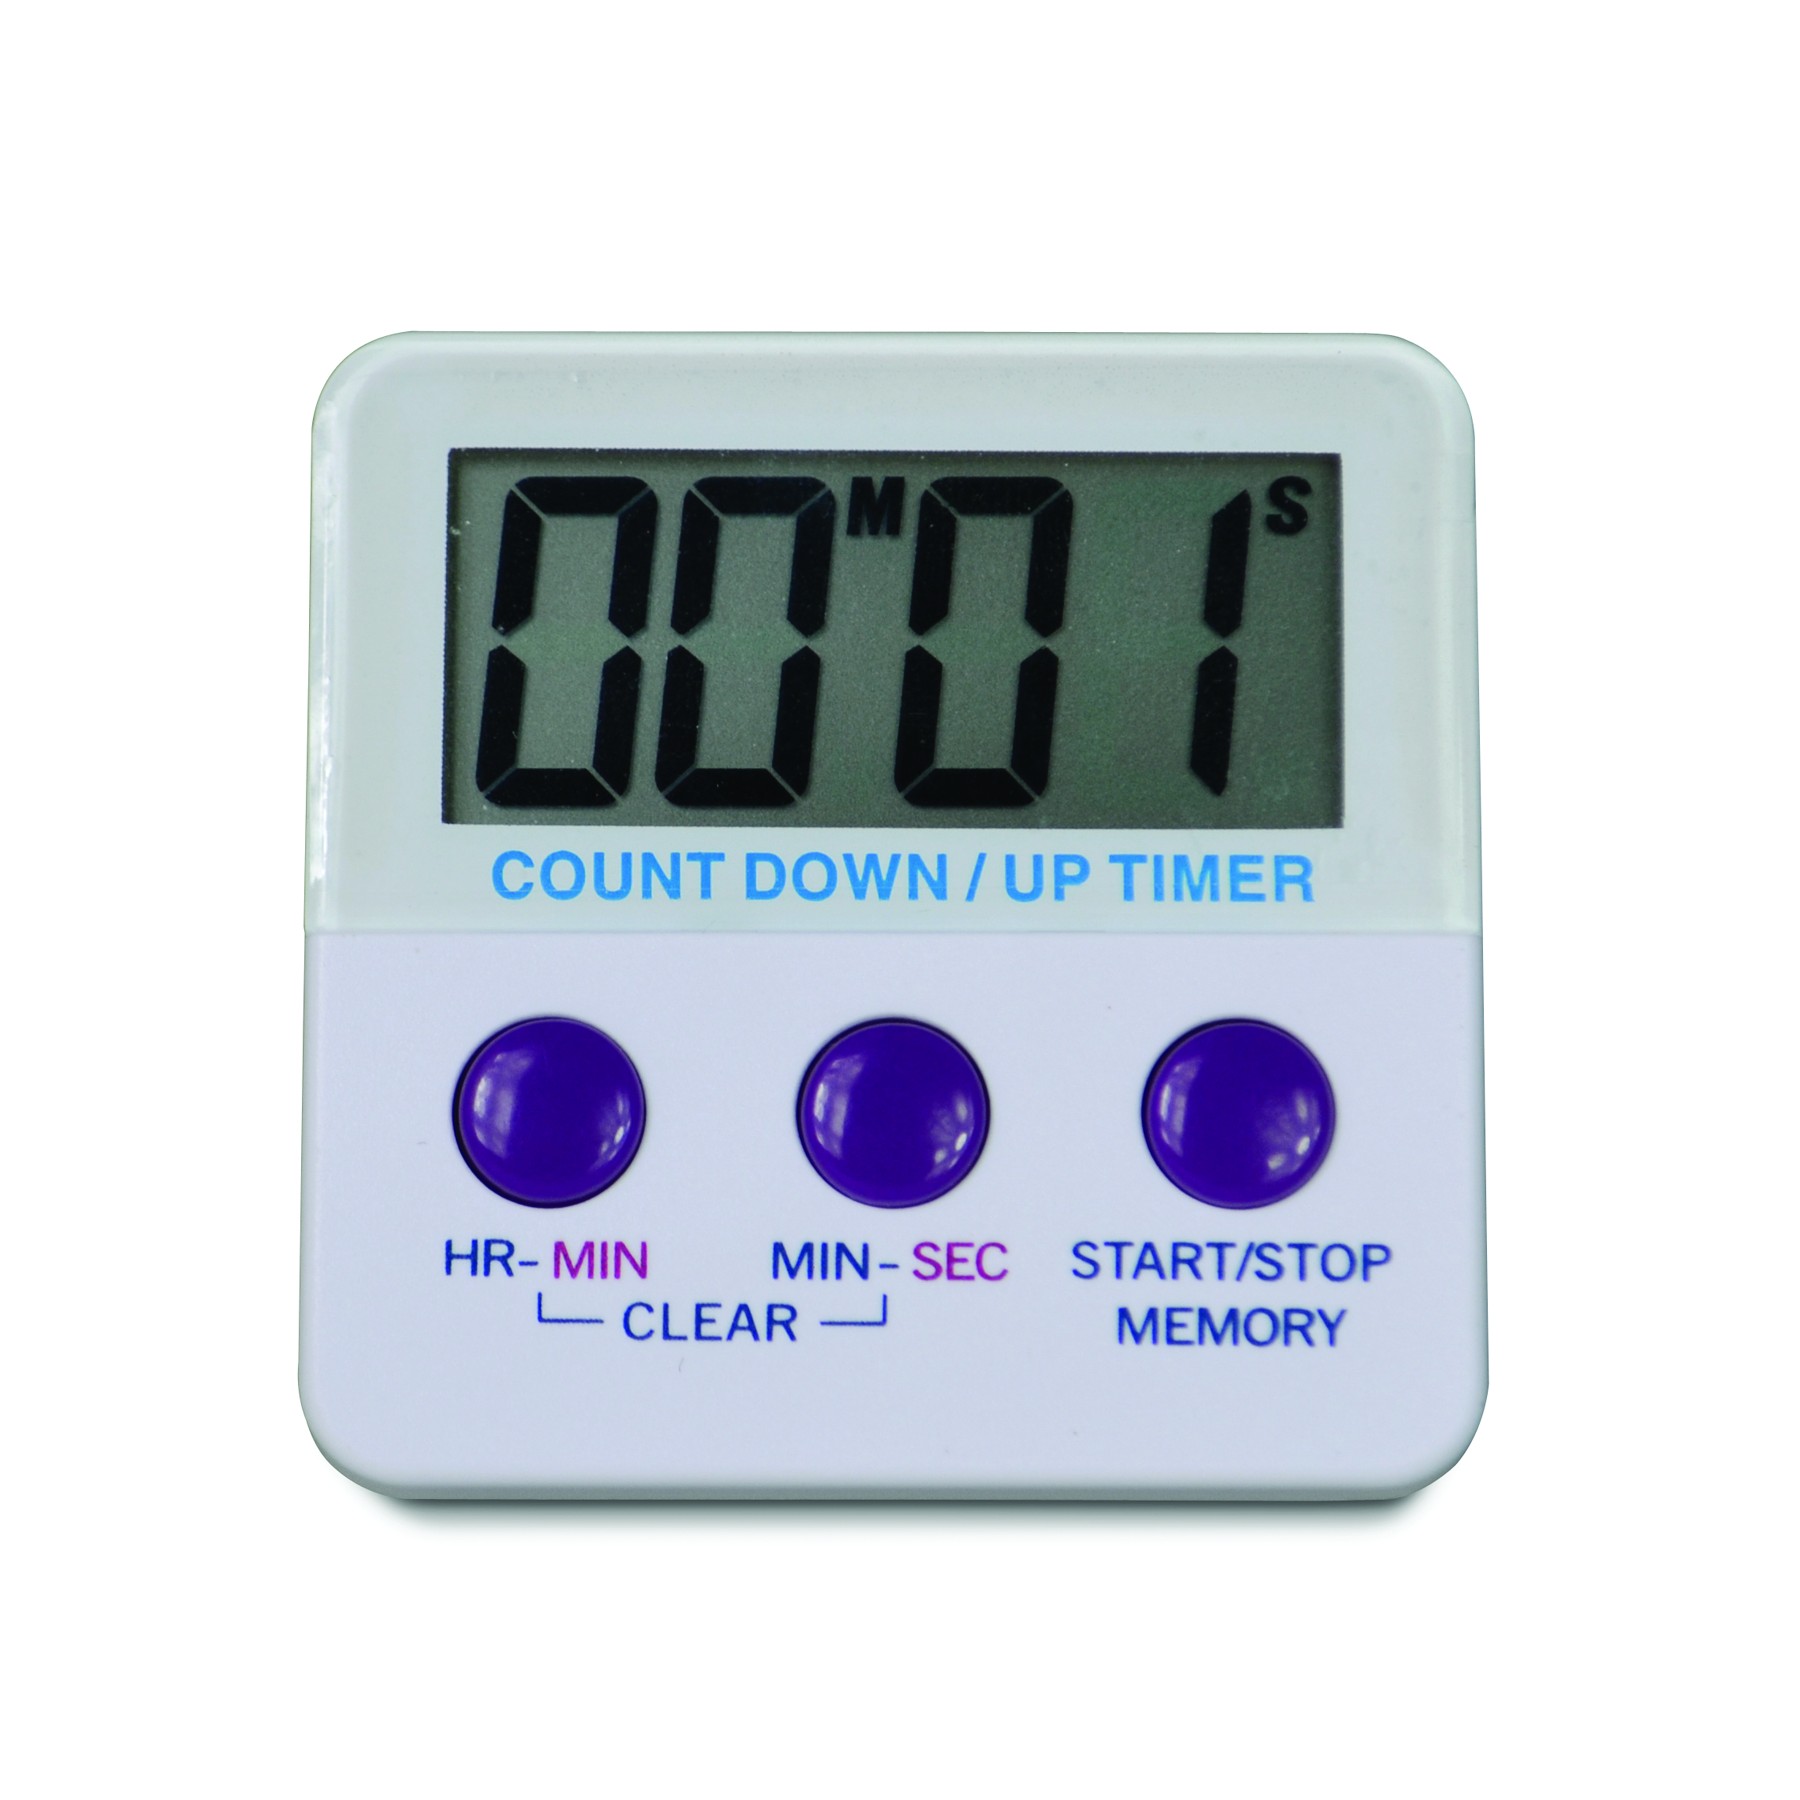 H-B DURAC Single Channel, Switchable Electronic Timer with Certificate of Calibration